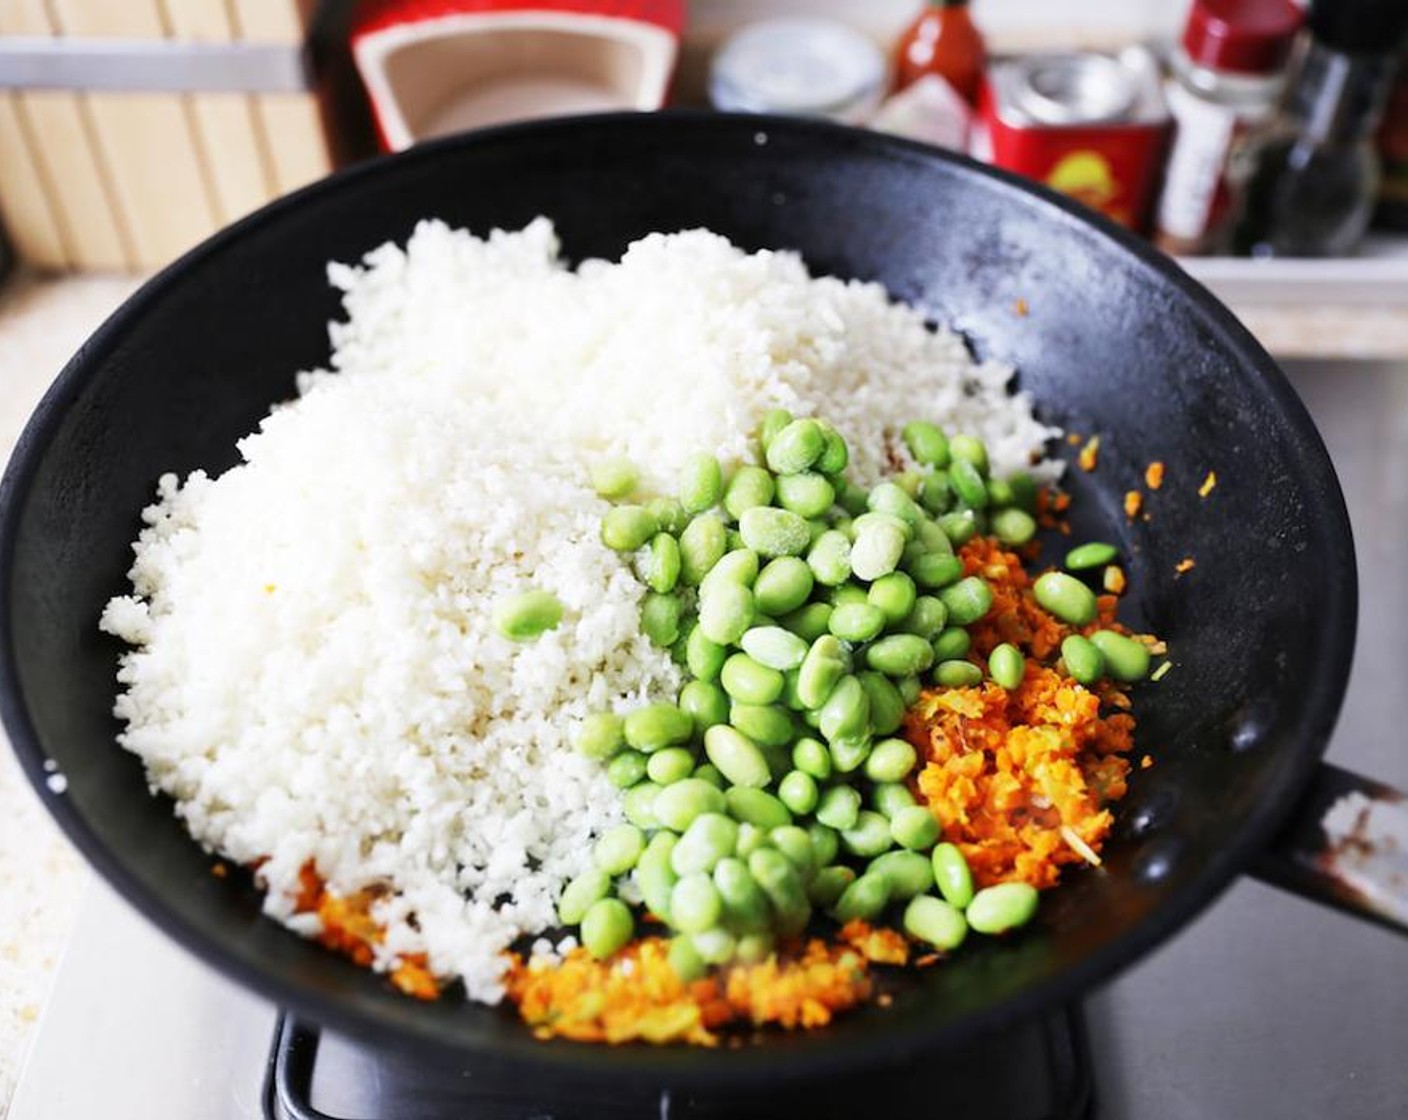 step 4 Add the cauli rice and Edamame (1/4 cup) beans and stir fry quickly for around 3 minutes.